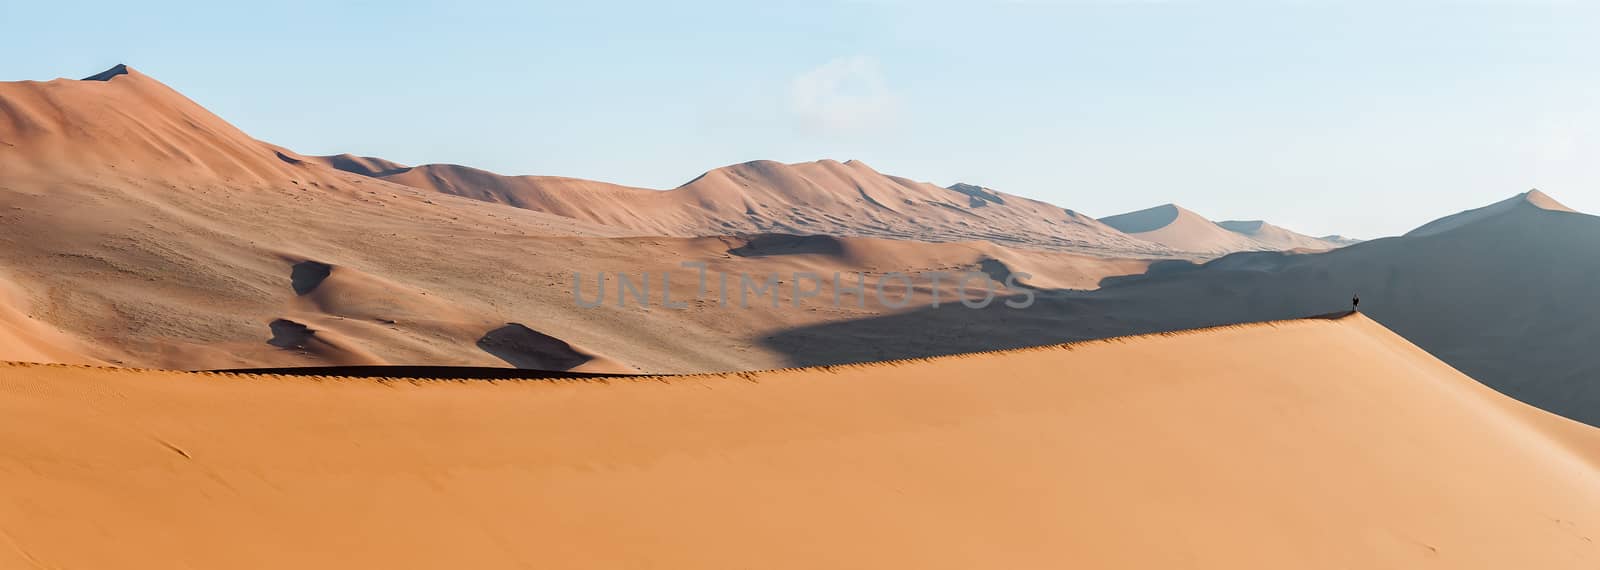 Panoramic view from the sickle shaped sand dune next to Sossusvlei towards the north-east. Sand dunes and a tourist are visible